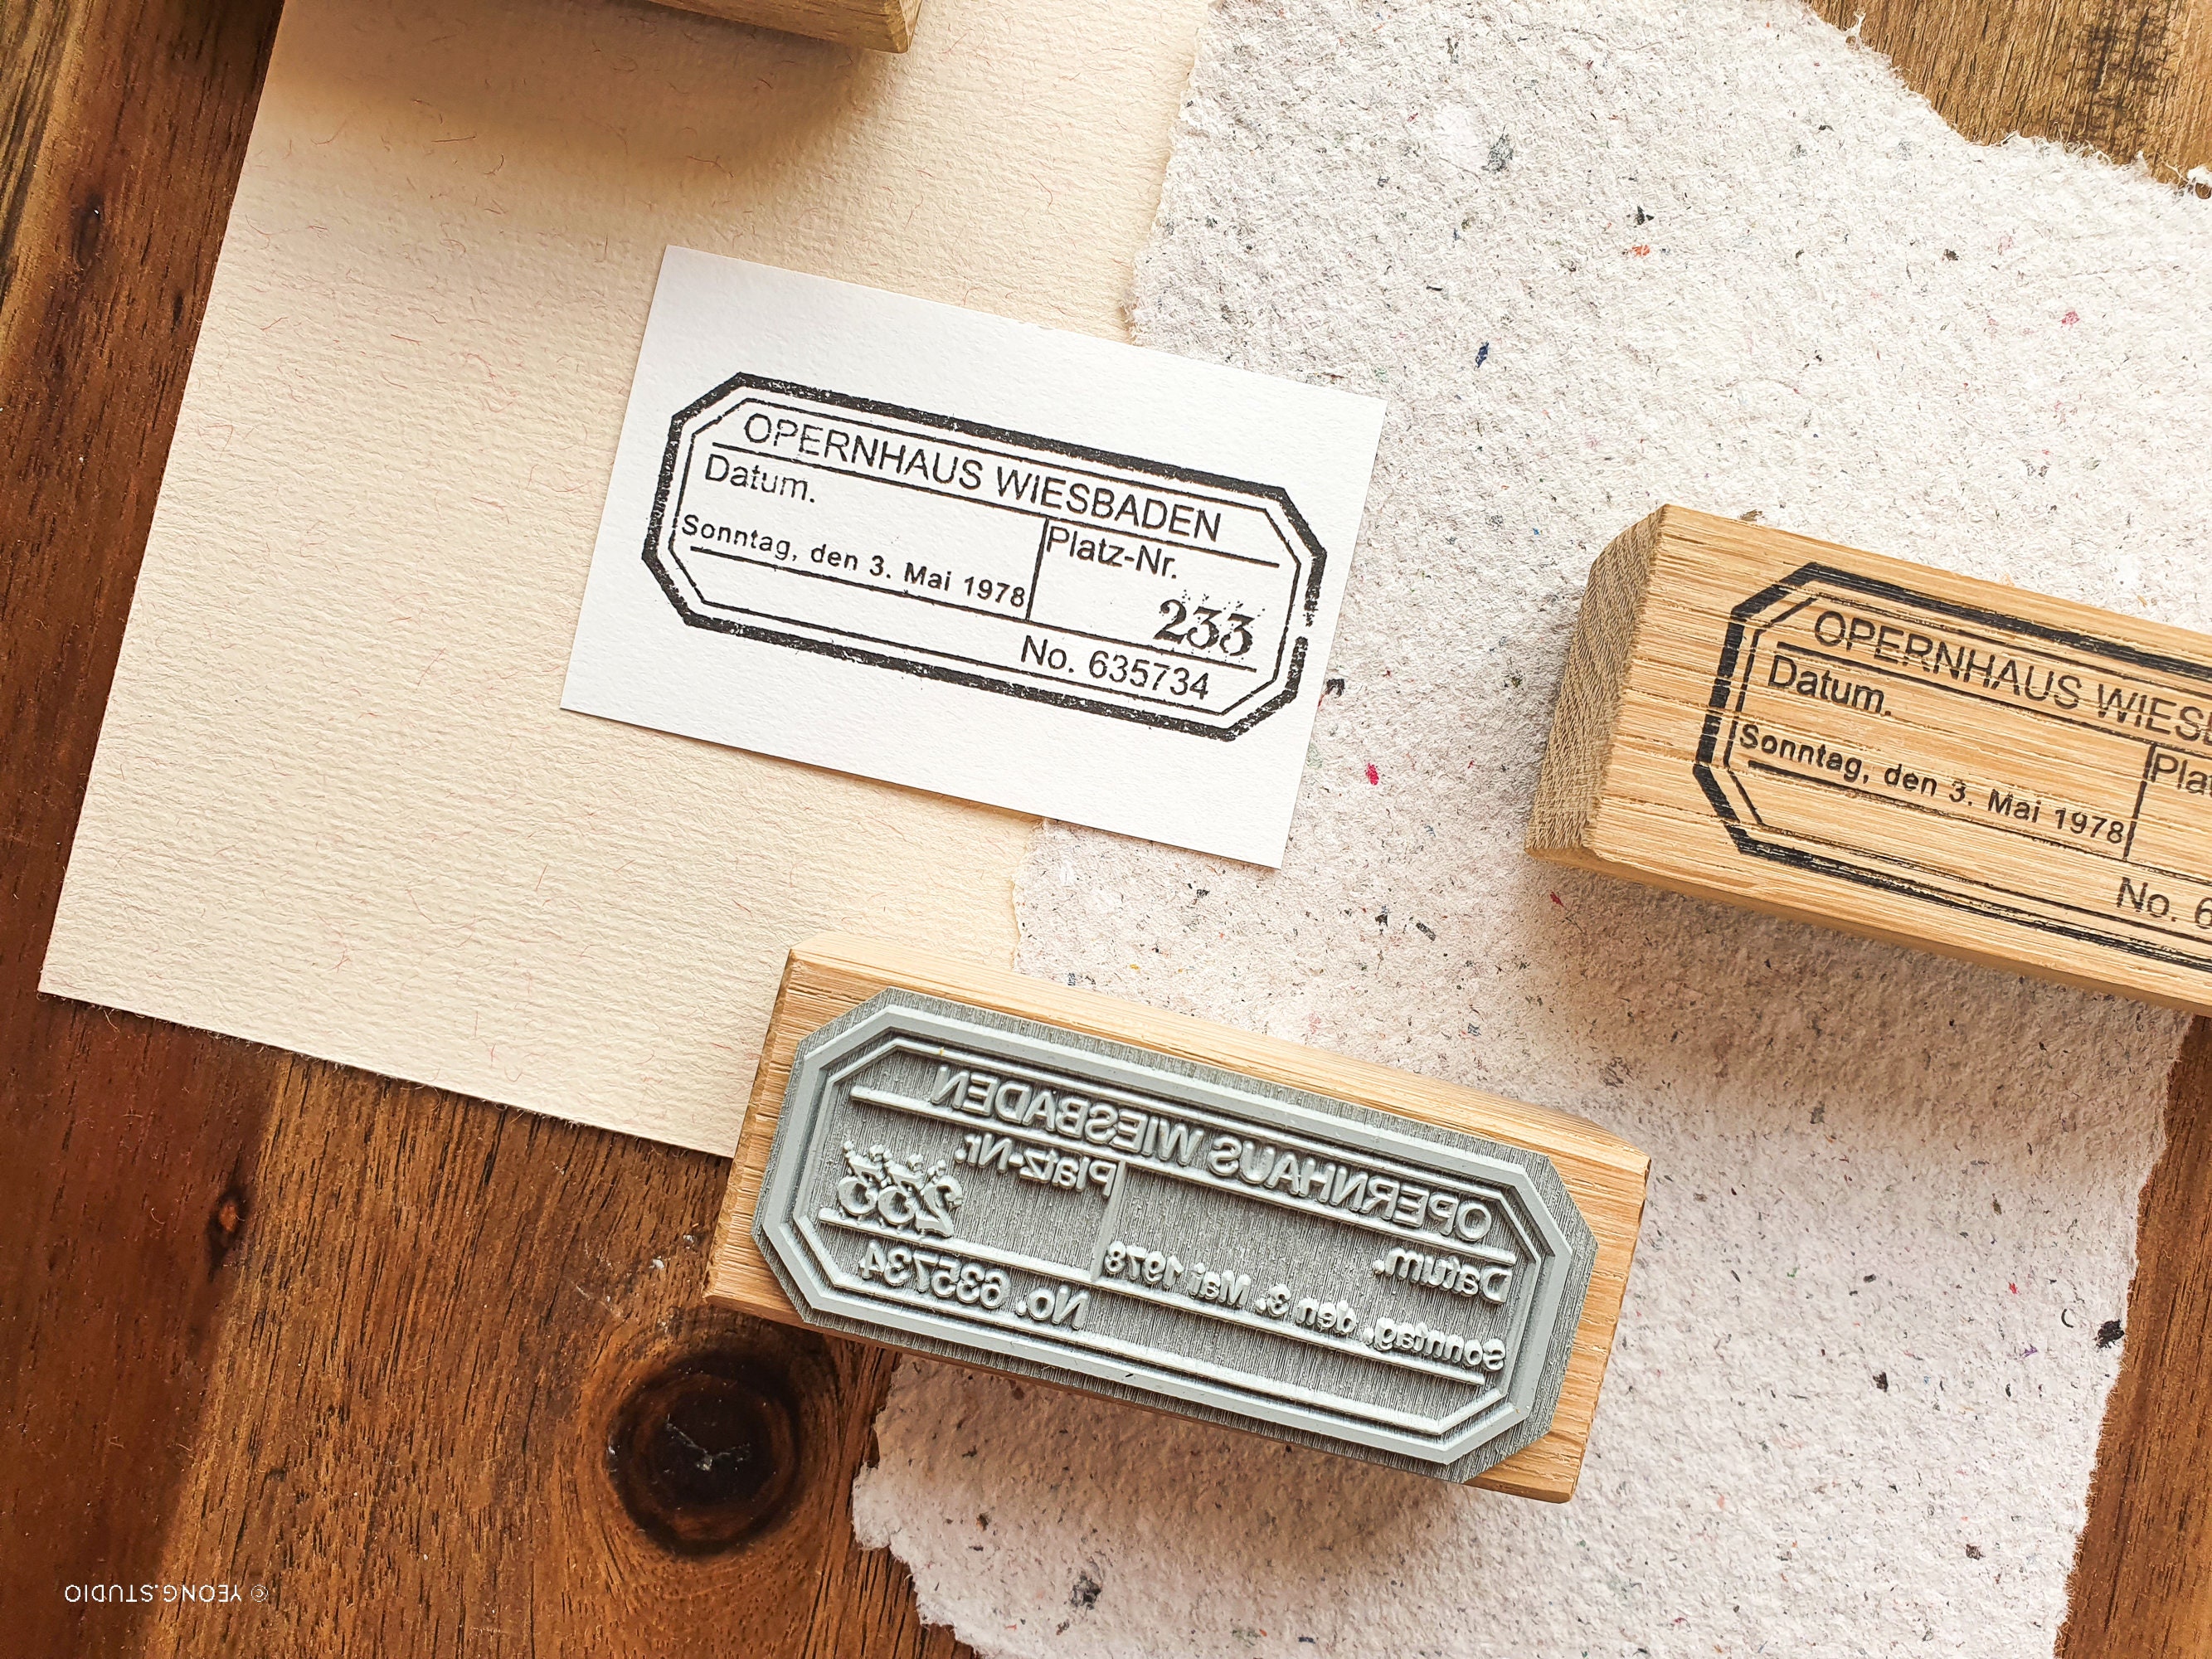 Taylor Swift Rubber Stamp No. 1 - Stampmore